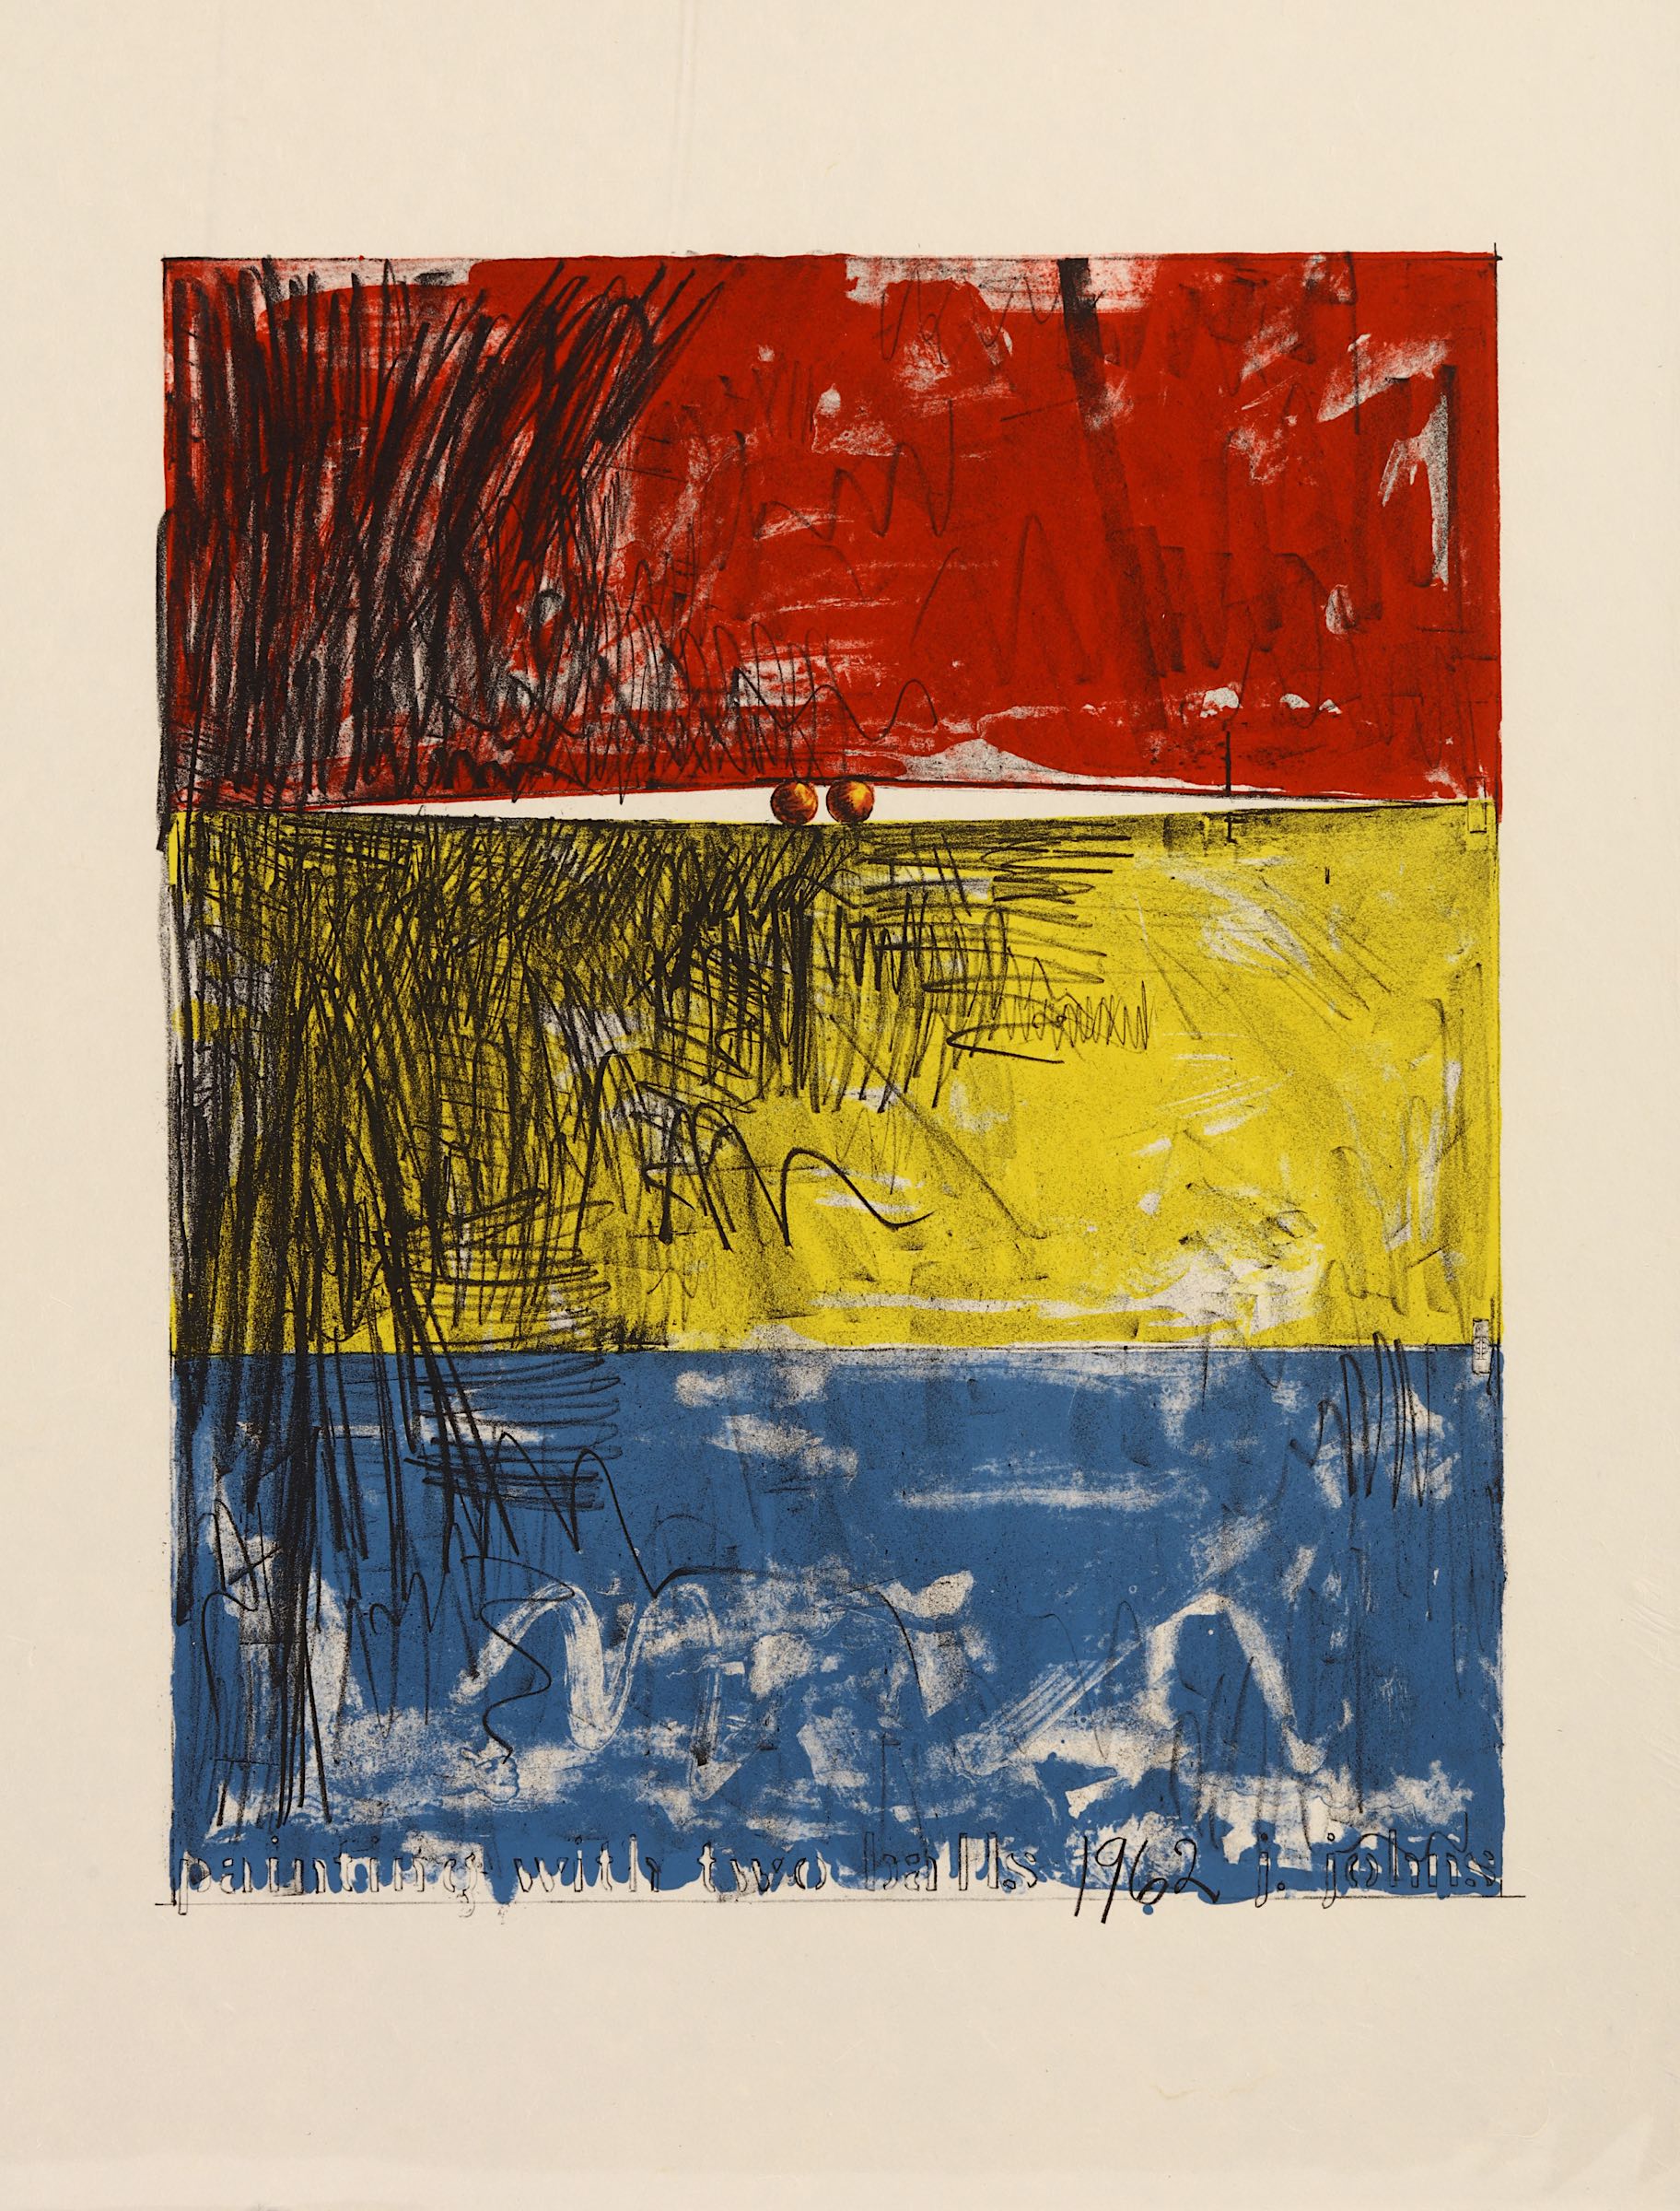 Jasper Johns (American b.1930), 'Painting With Two Balls I', 1962, unsigned facsimile copy,